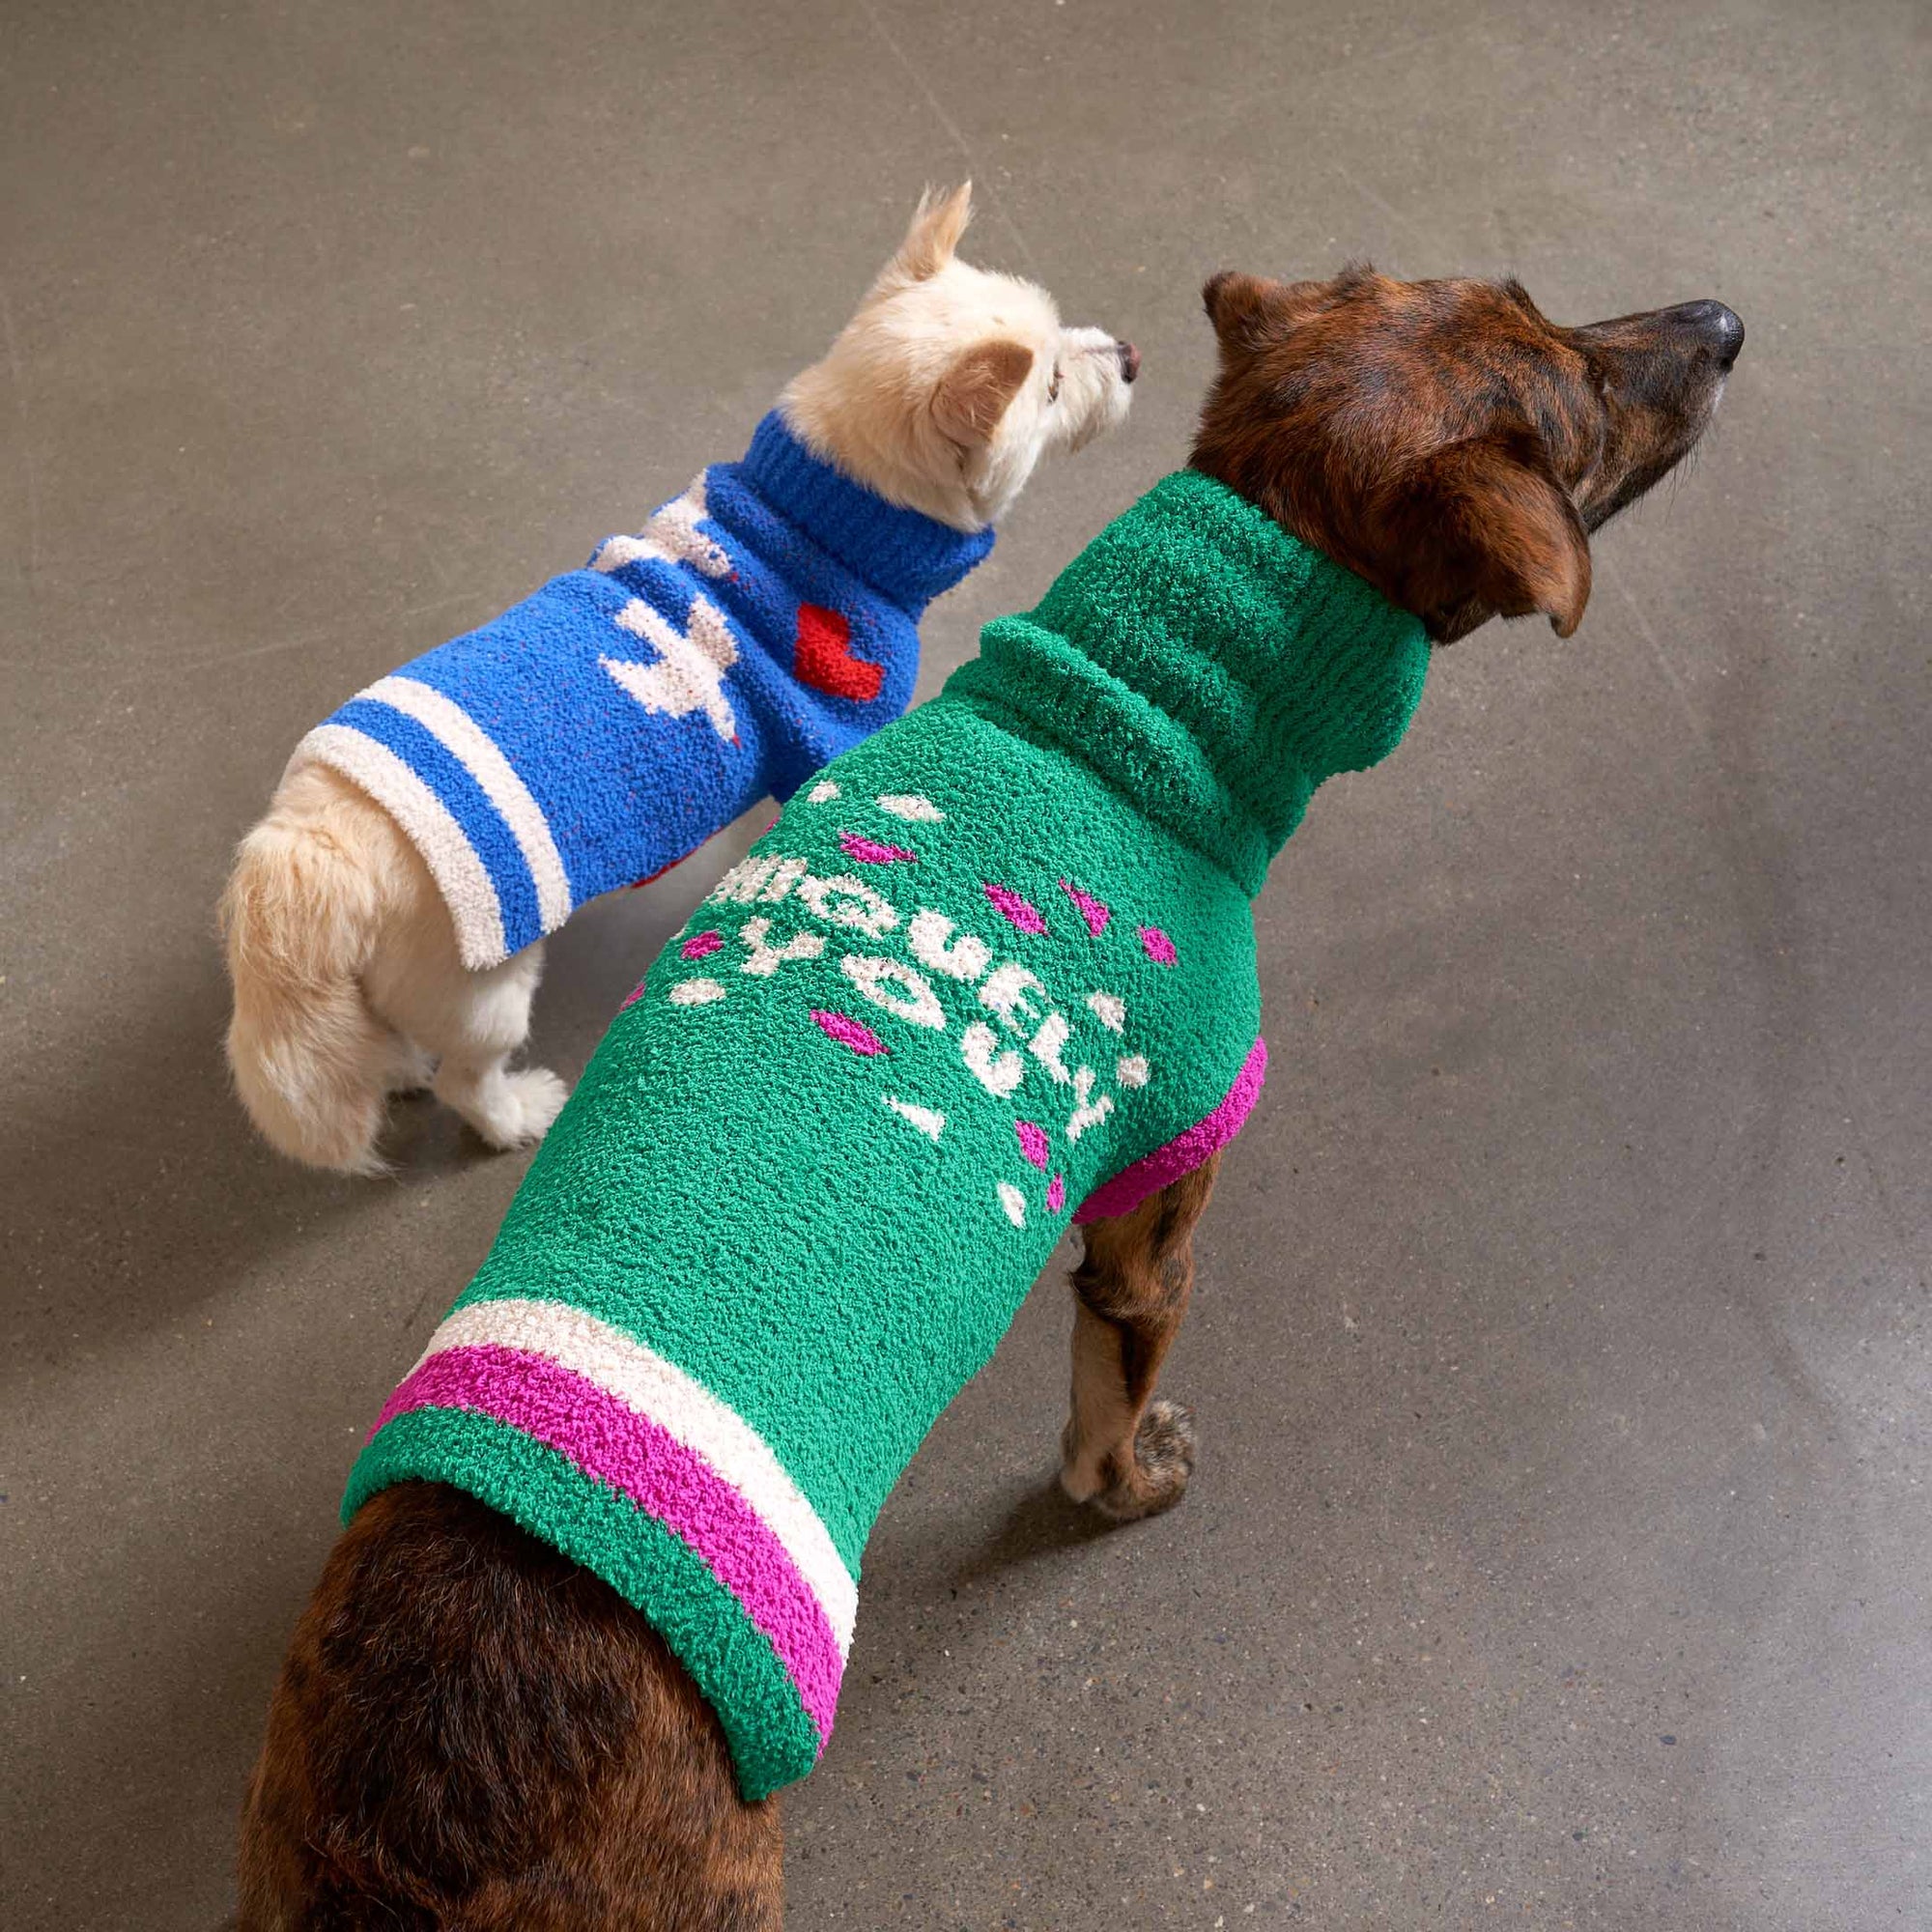  A brindle dog in a green sweater and a tan dog in a blue sweater, both from "The Furryfolks", on a grey floor.